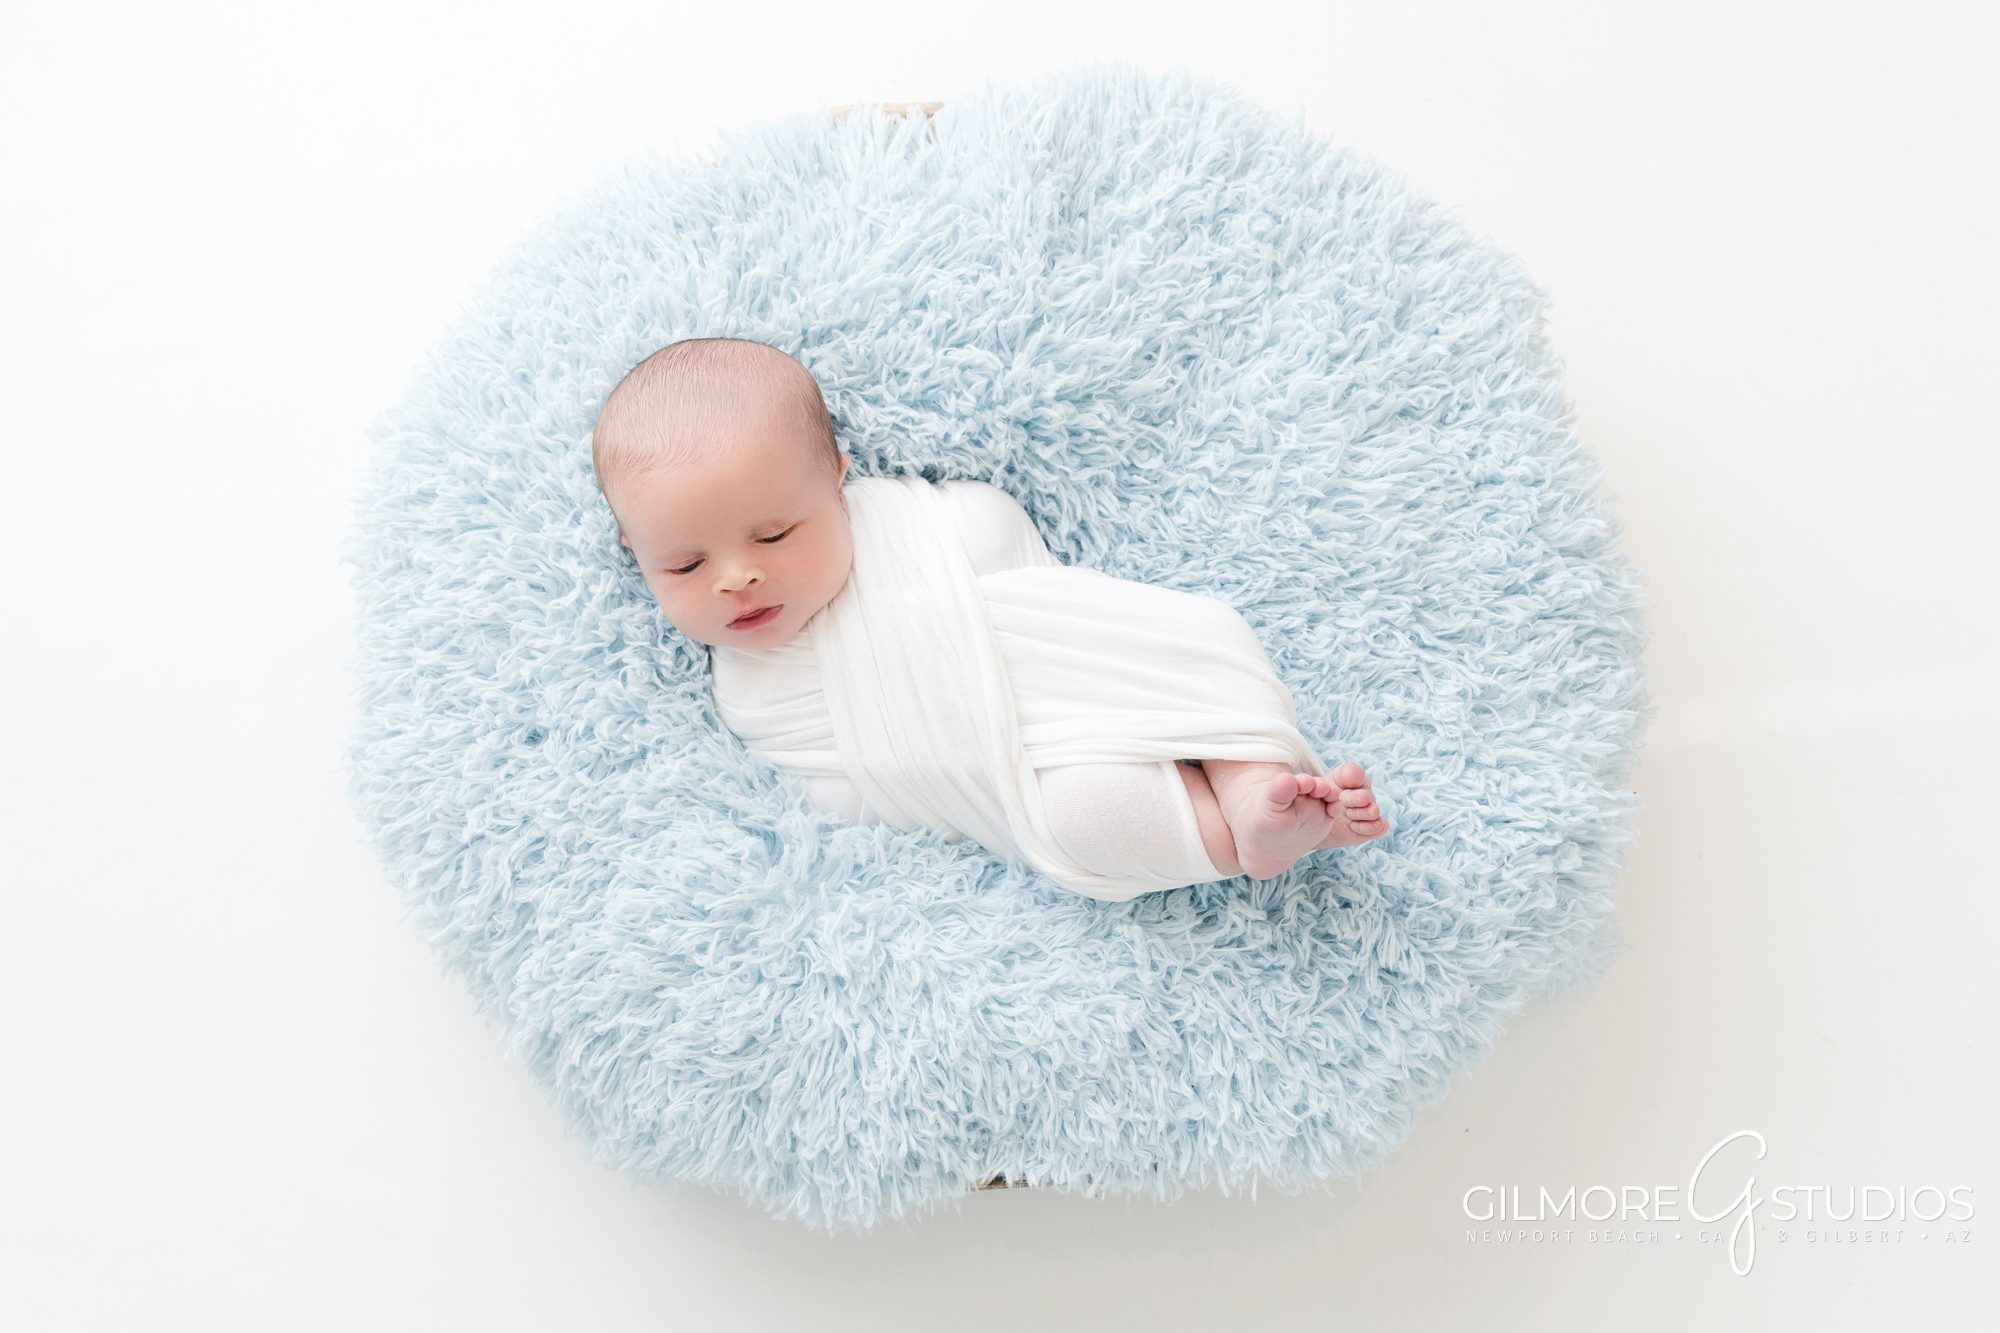 Gilbert Newborn Photographer, family portrait with baby, baby studio in Gilbert, AZ - Chandler, Queen Creek, Scottsdale, Professional Newborn Photography Studio, family session with toddler and newborn baby boy, blue, blanket, fuzzy background, white simple clean backdrop with wrapped baby boy